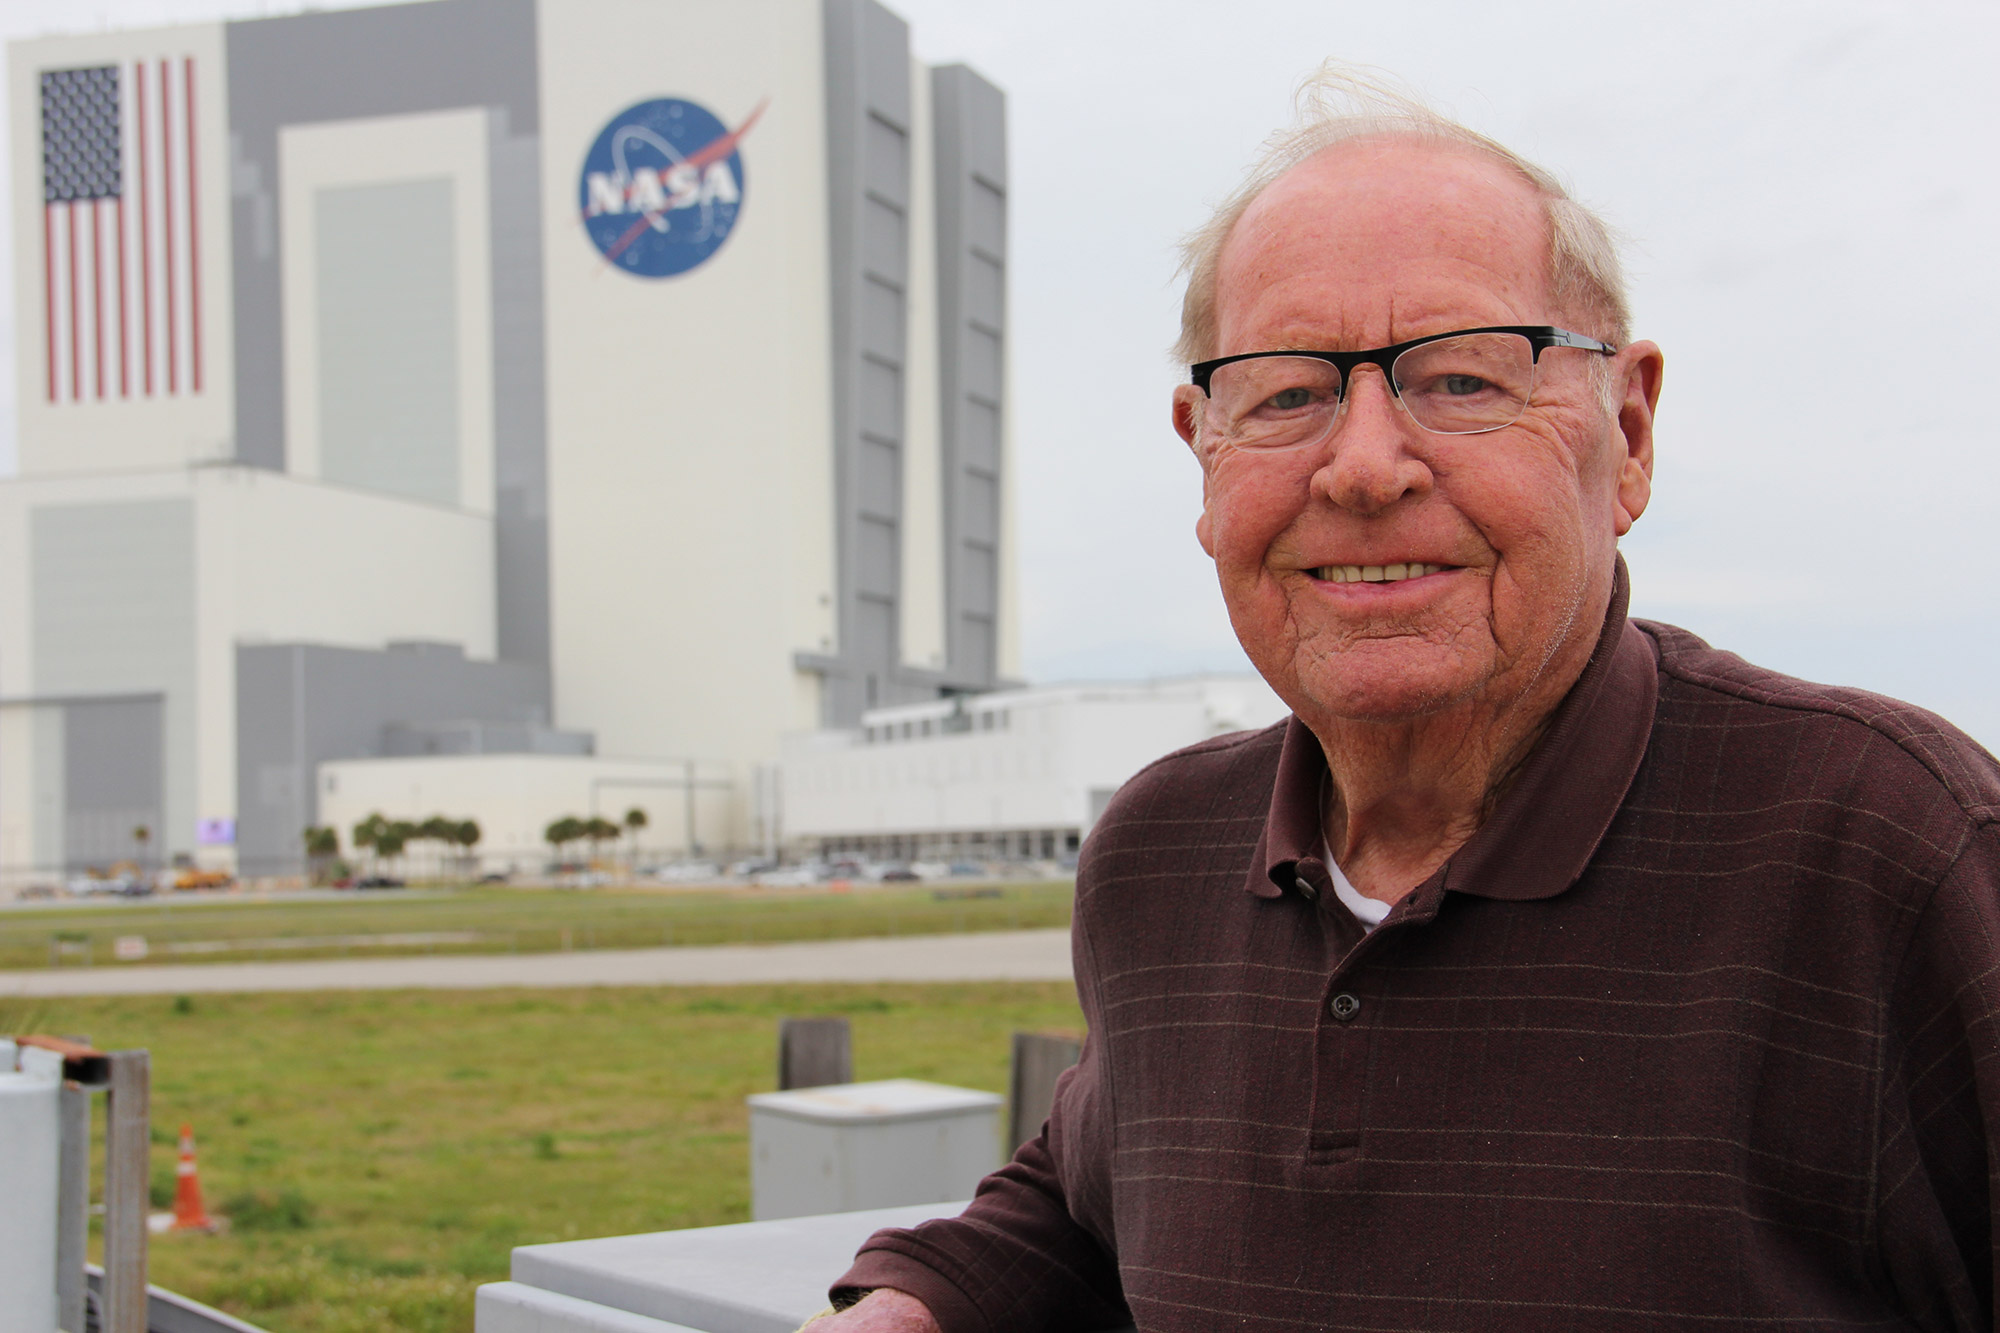 Jack King stands outside the KSC Press Center with the VAB in the background. Credit: Nicole Solomon